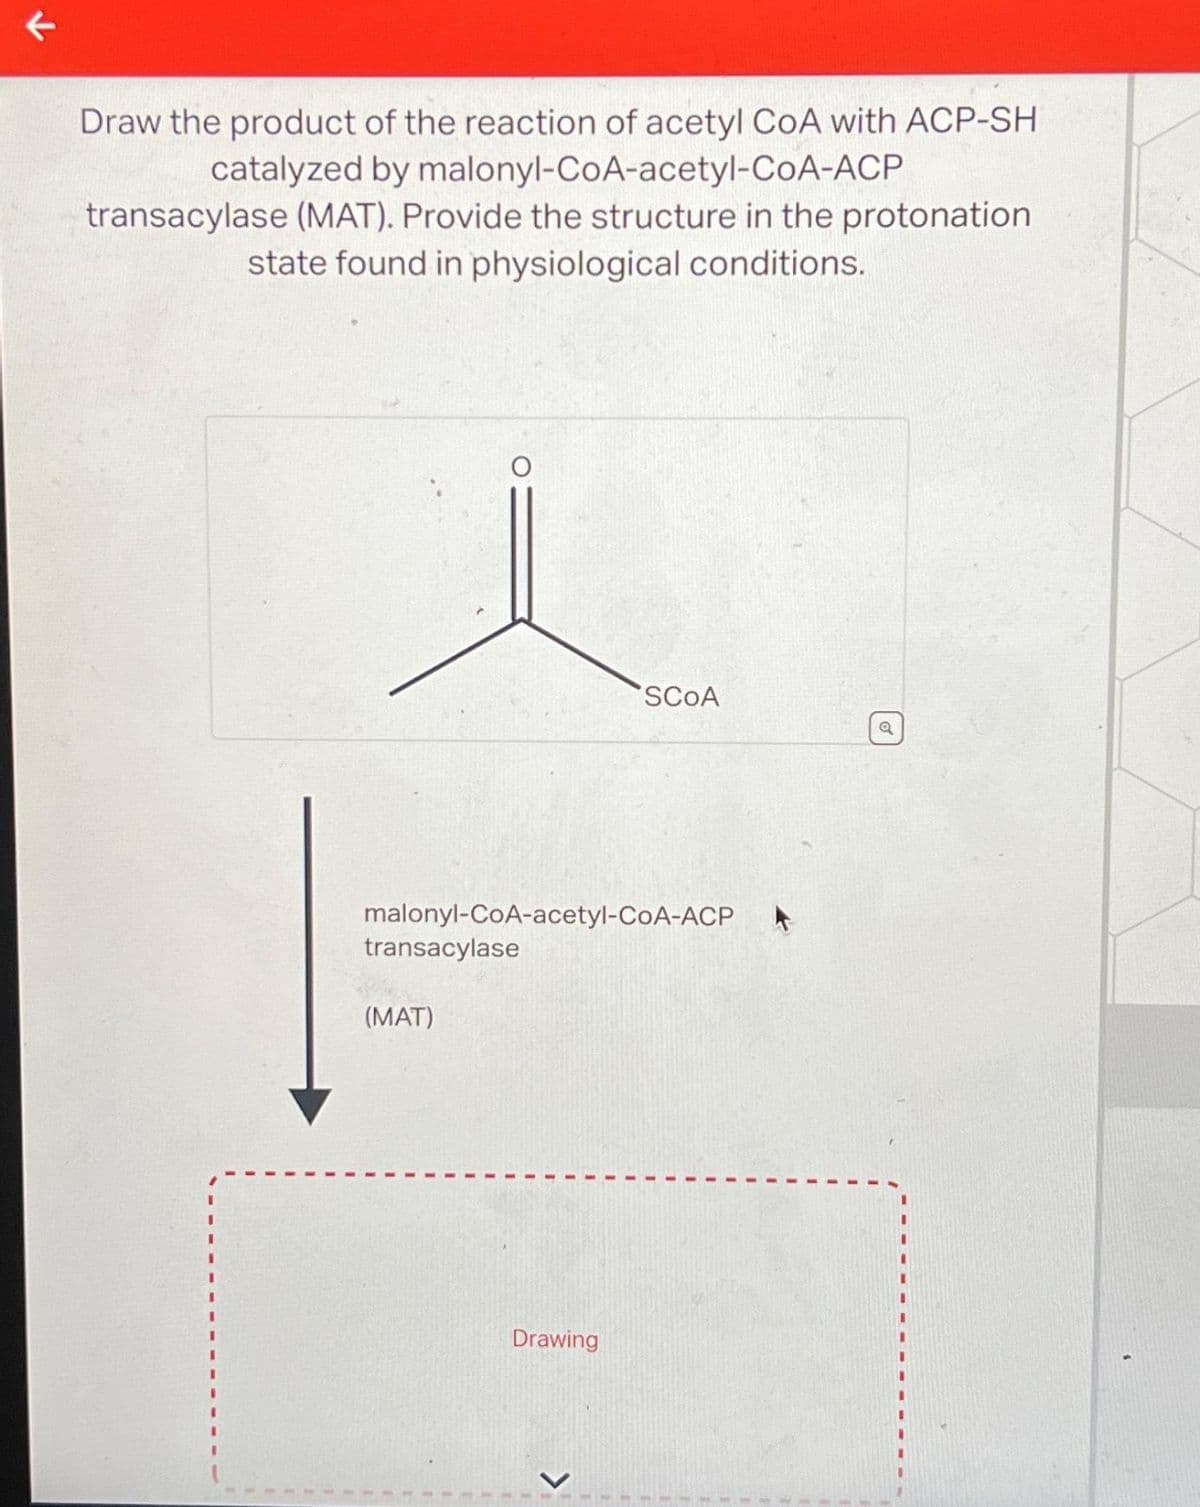 ←
Draw the product of the reaction of acetyl CoA with ACP-SH
catalyzed by malonyl-CoA-acetyl-CoA-ACP
transacylase (MAT). Provide the structure in the protonation
state found in physiological conditions.
malonyl-CoA-acetyl-CoA-ACP
transacylase
(MAT)
SCOA
Drawing
o